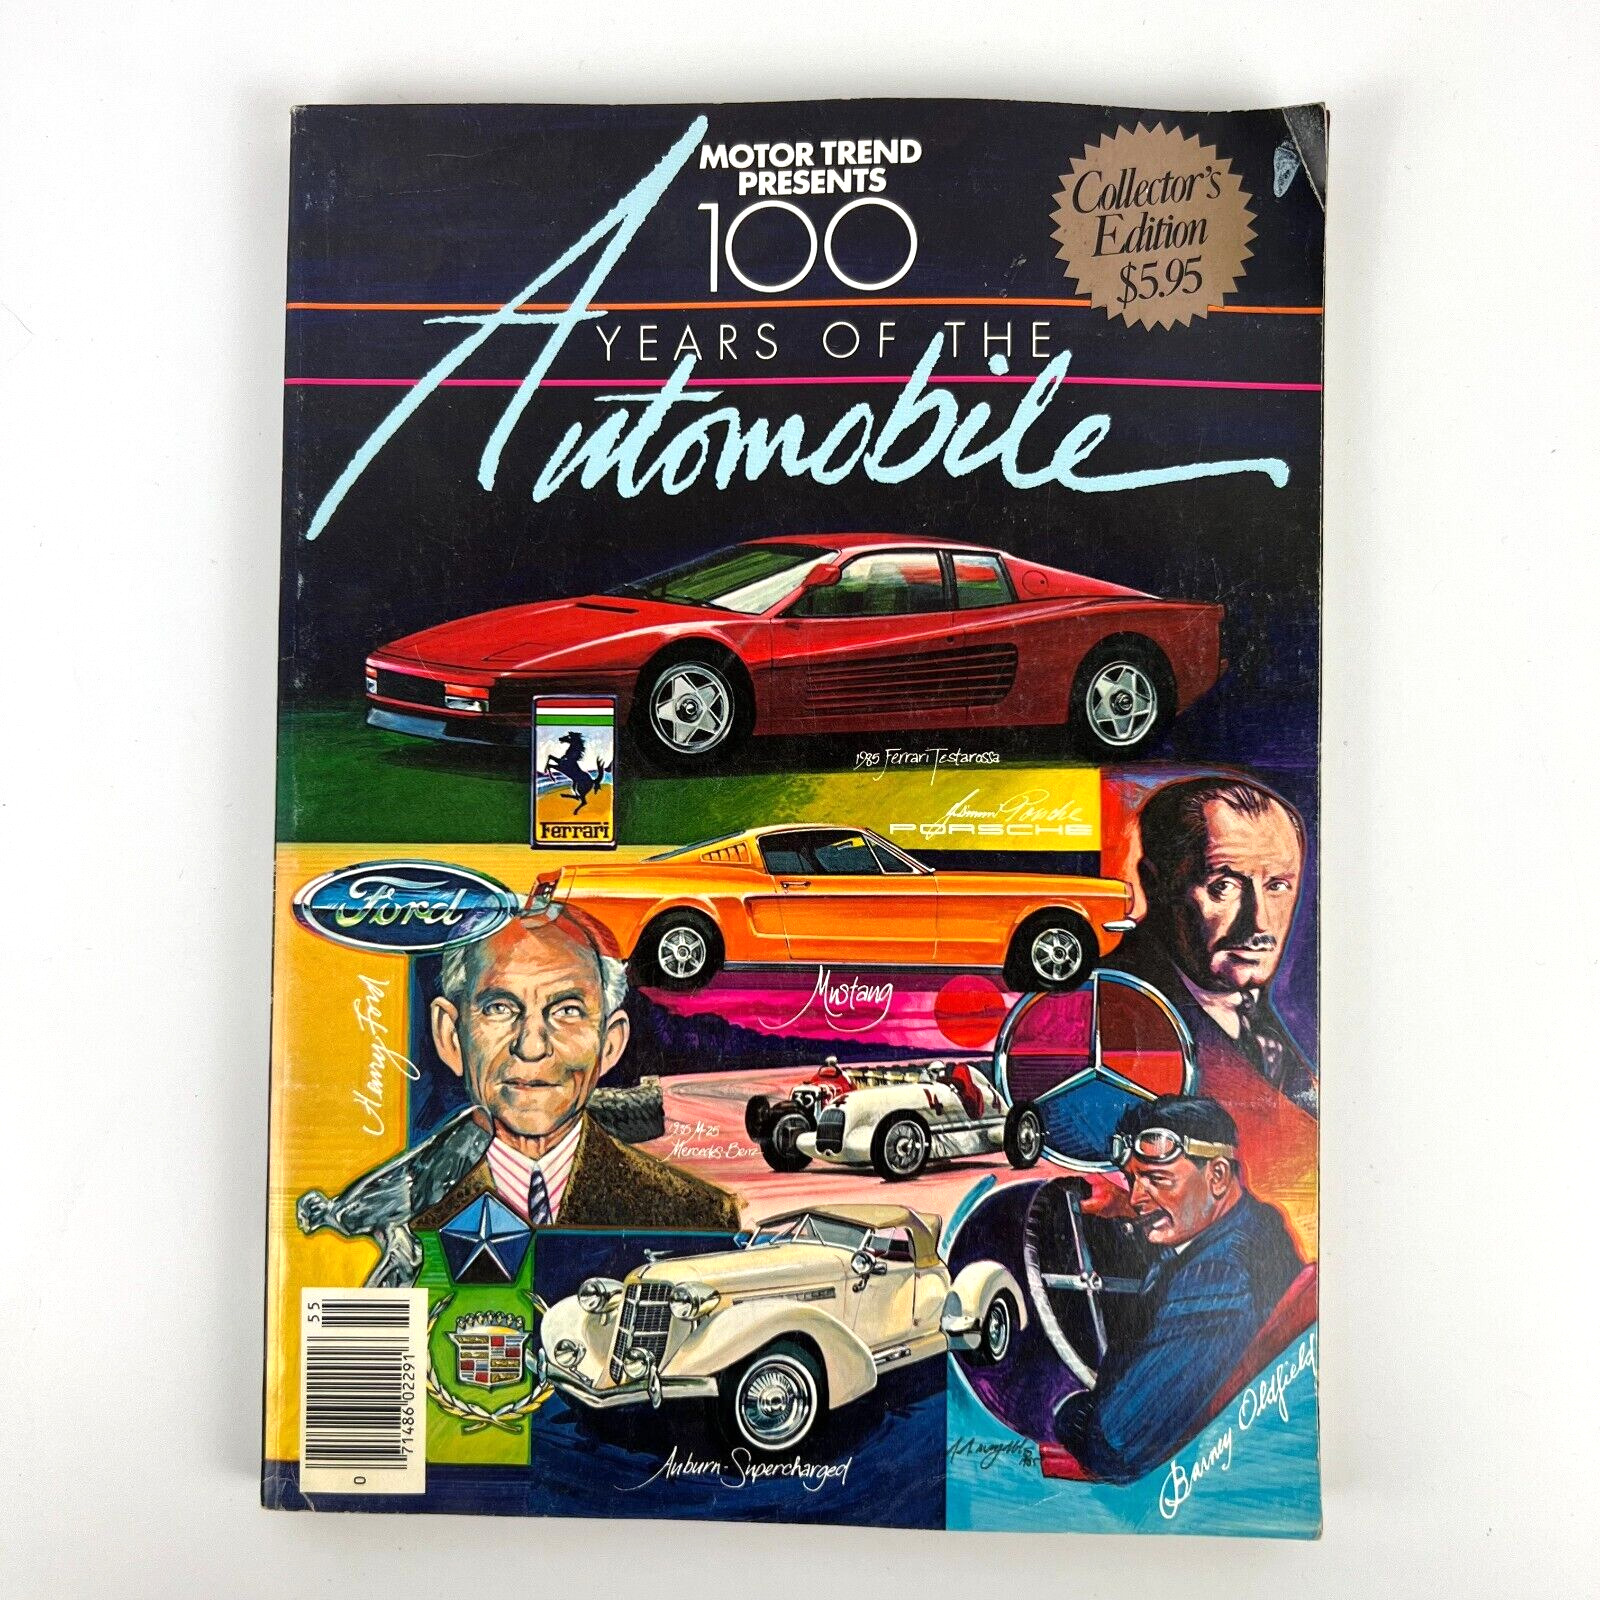 Vintage Motor Trend Presents 100 Years Of The Automobile Collectors Edition 1985